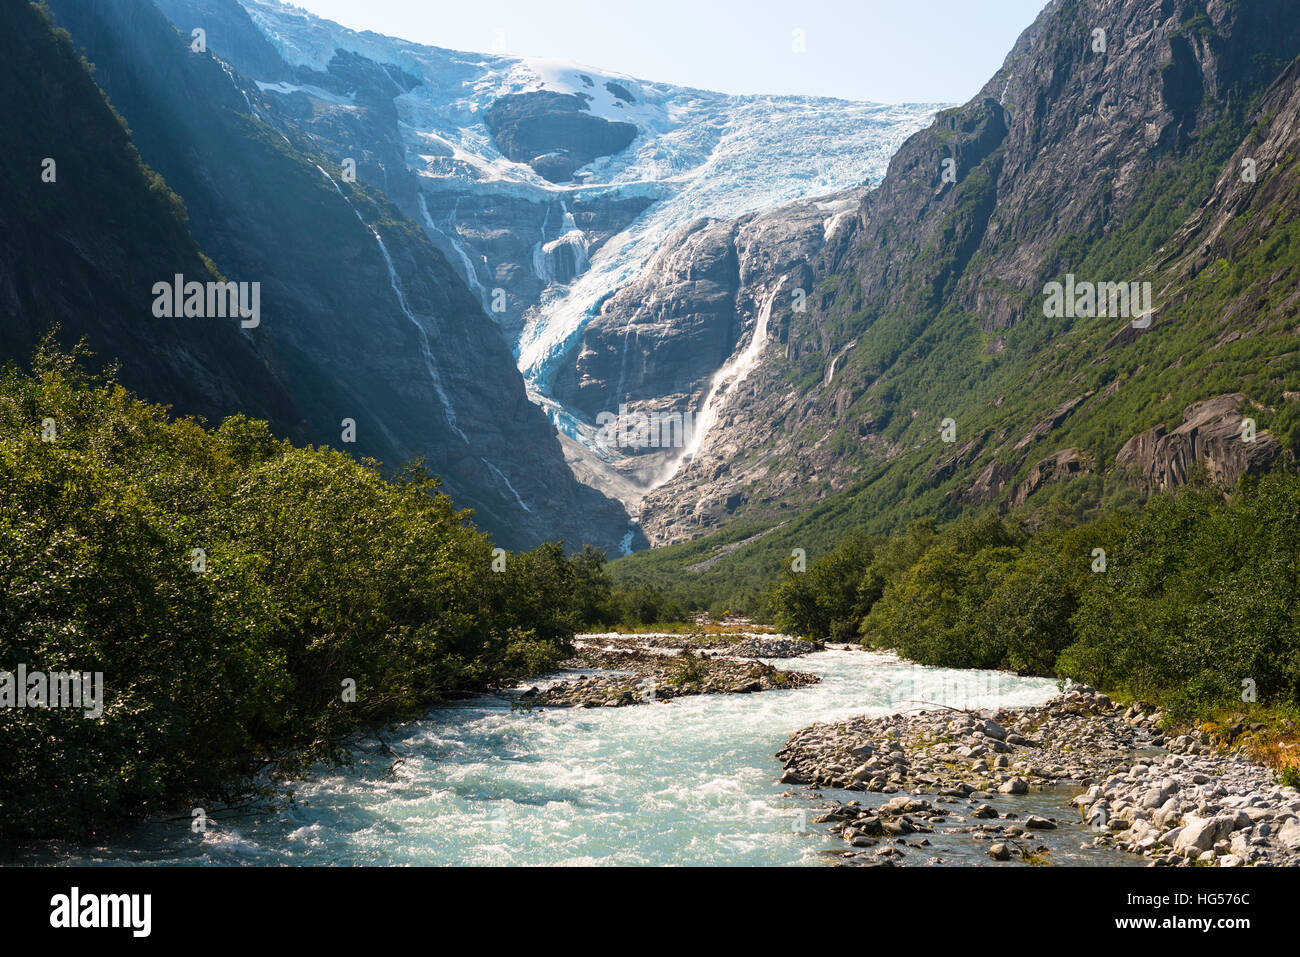 Norway scenic landscape with mountains, glacier and river. Briksdal Glacier is part of the Jostedal glacier ice field. Stock Photo